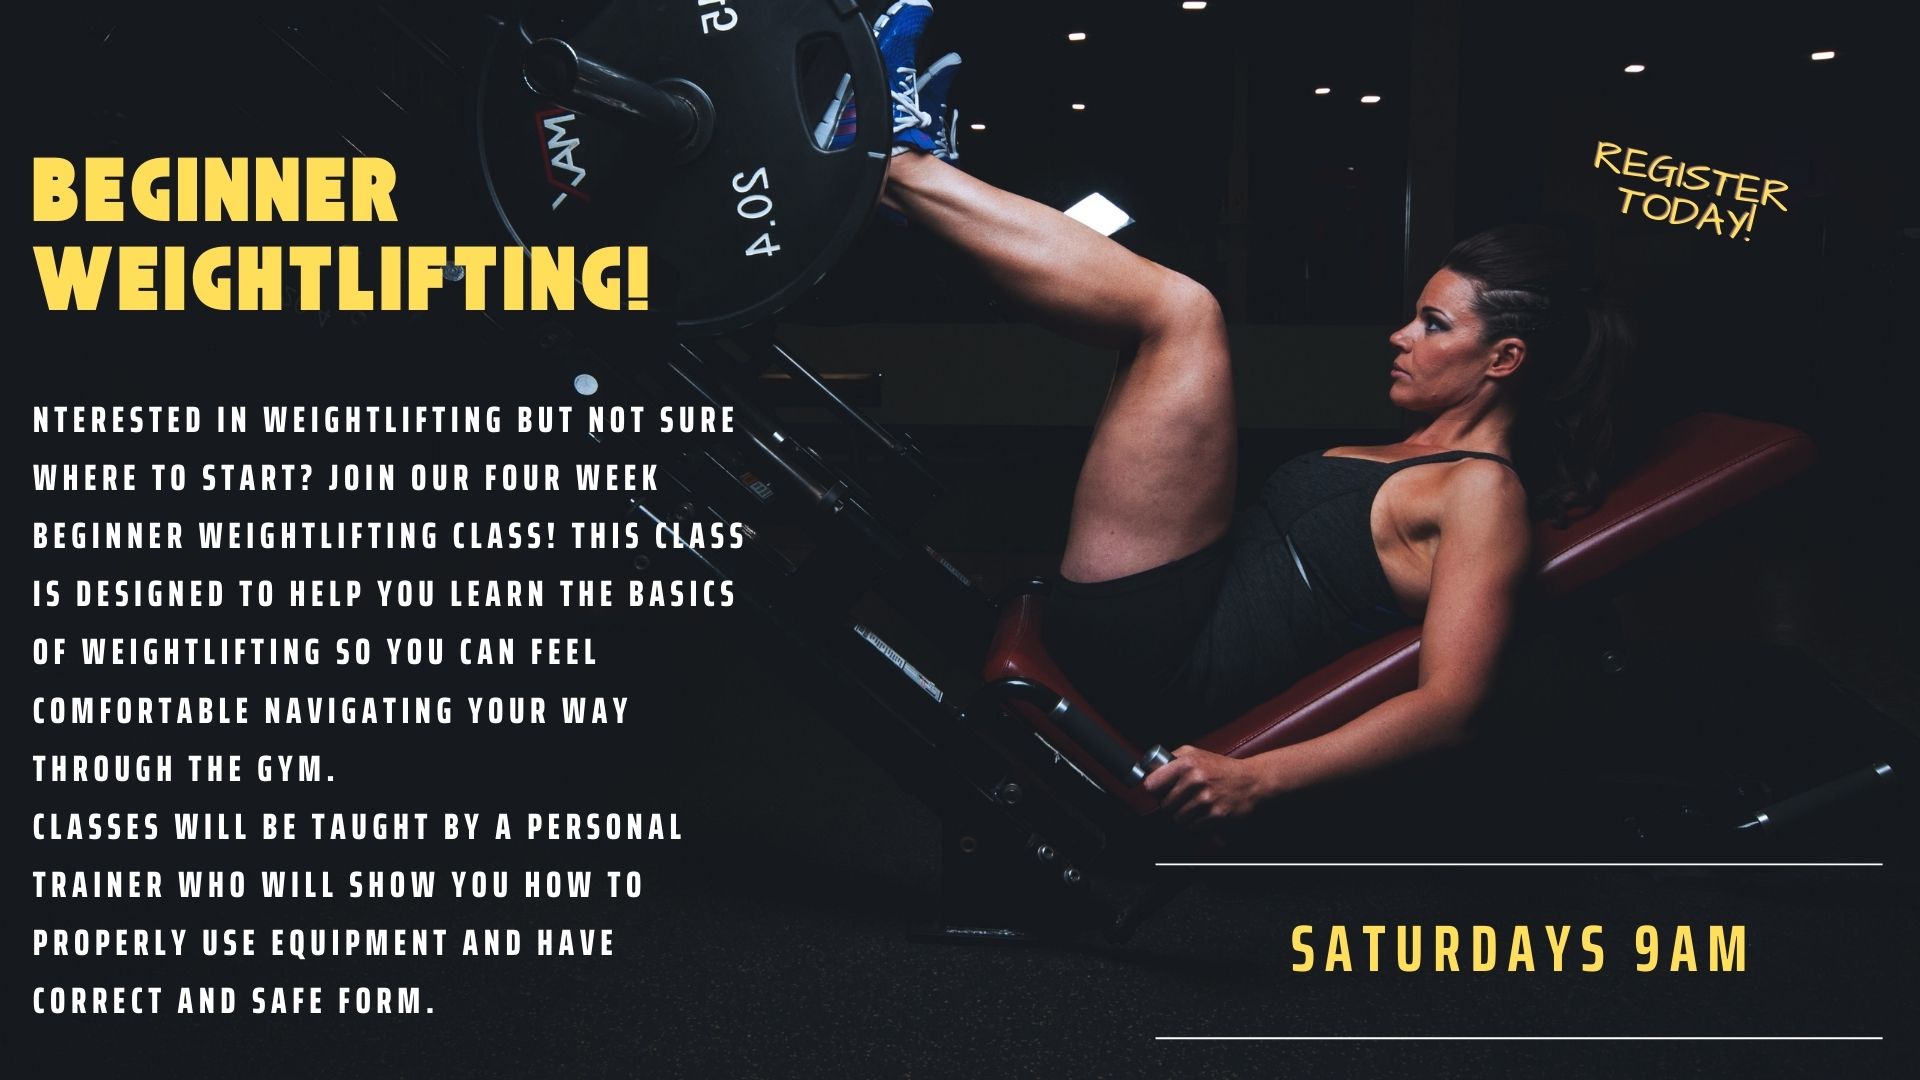 TV weightlifting flyer